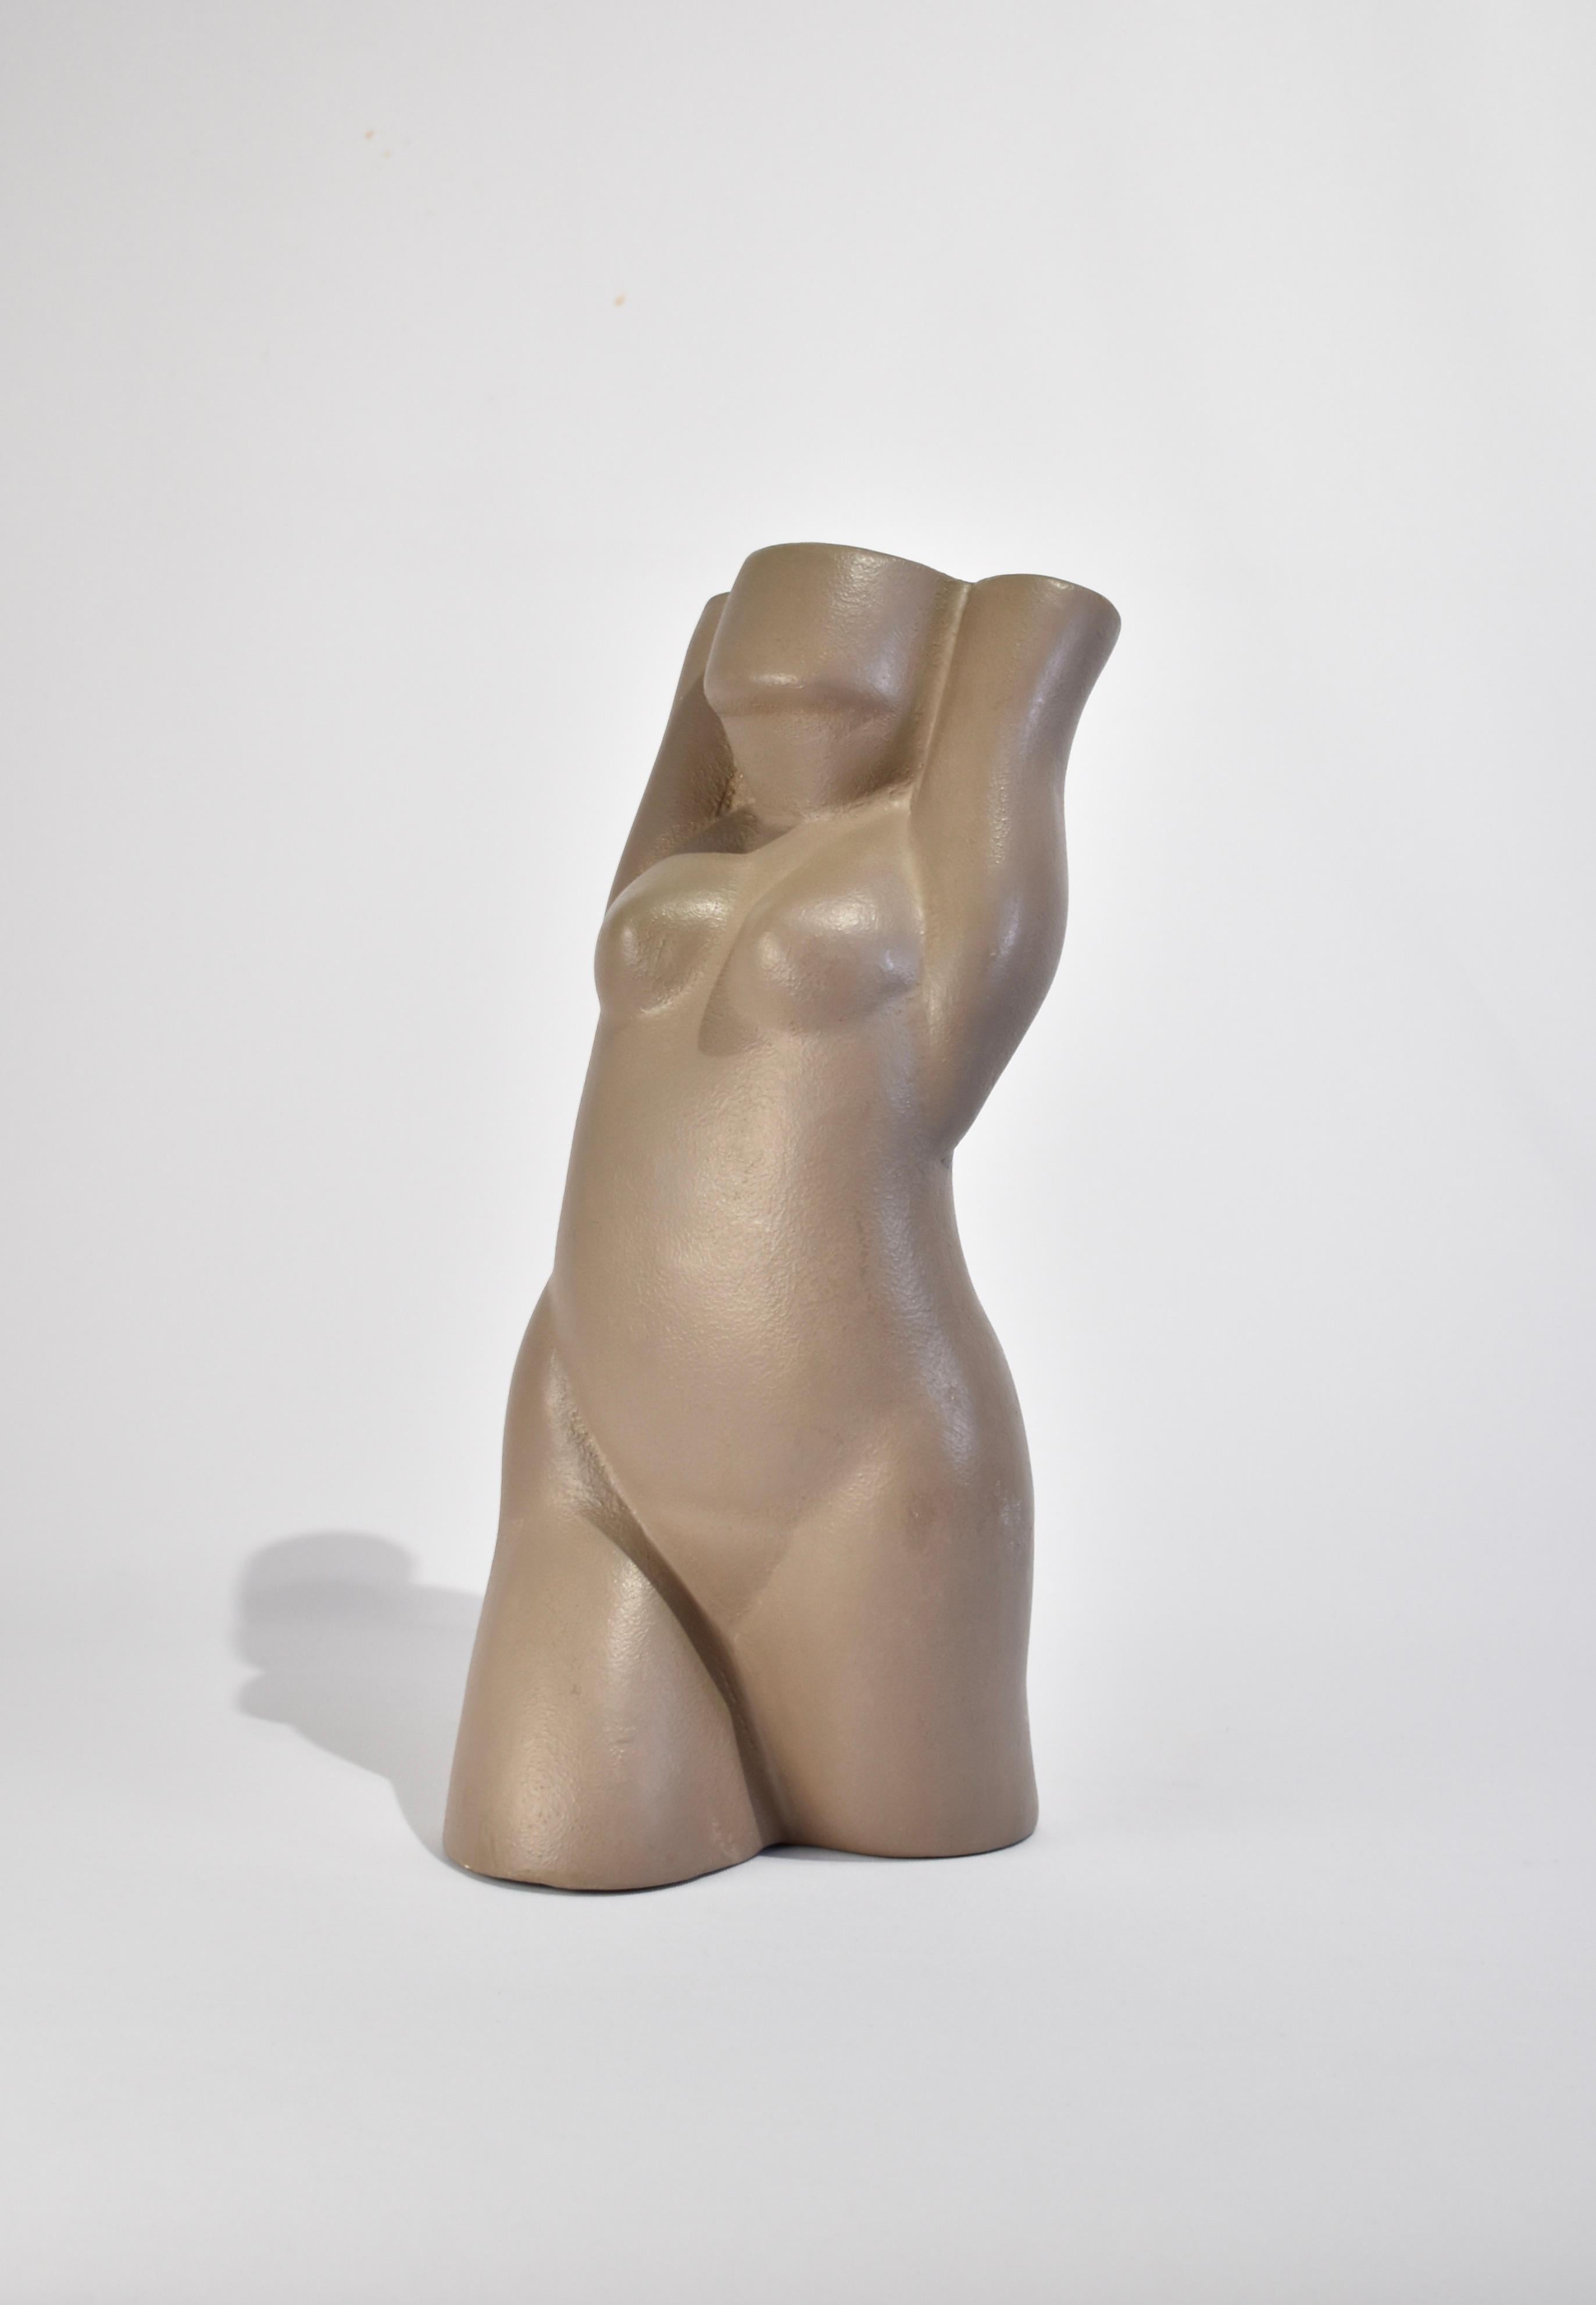 Vintage ceramic figure sculpture in a matte grey glaze, hollow inside. Attributed to Donna Polseno, not signed.